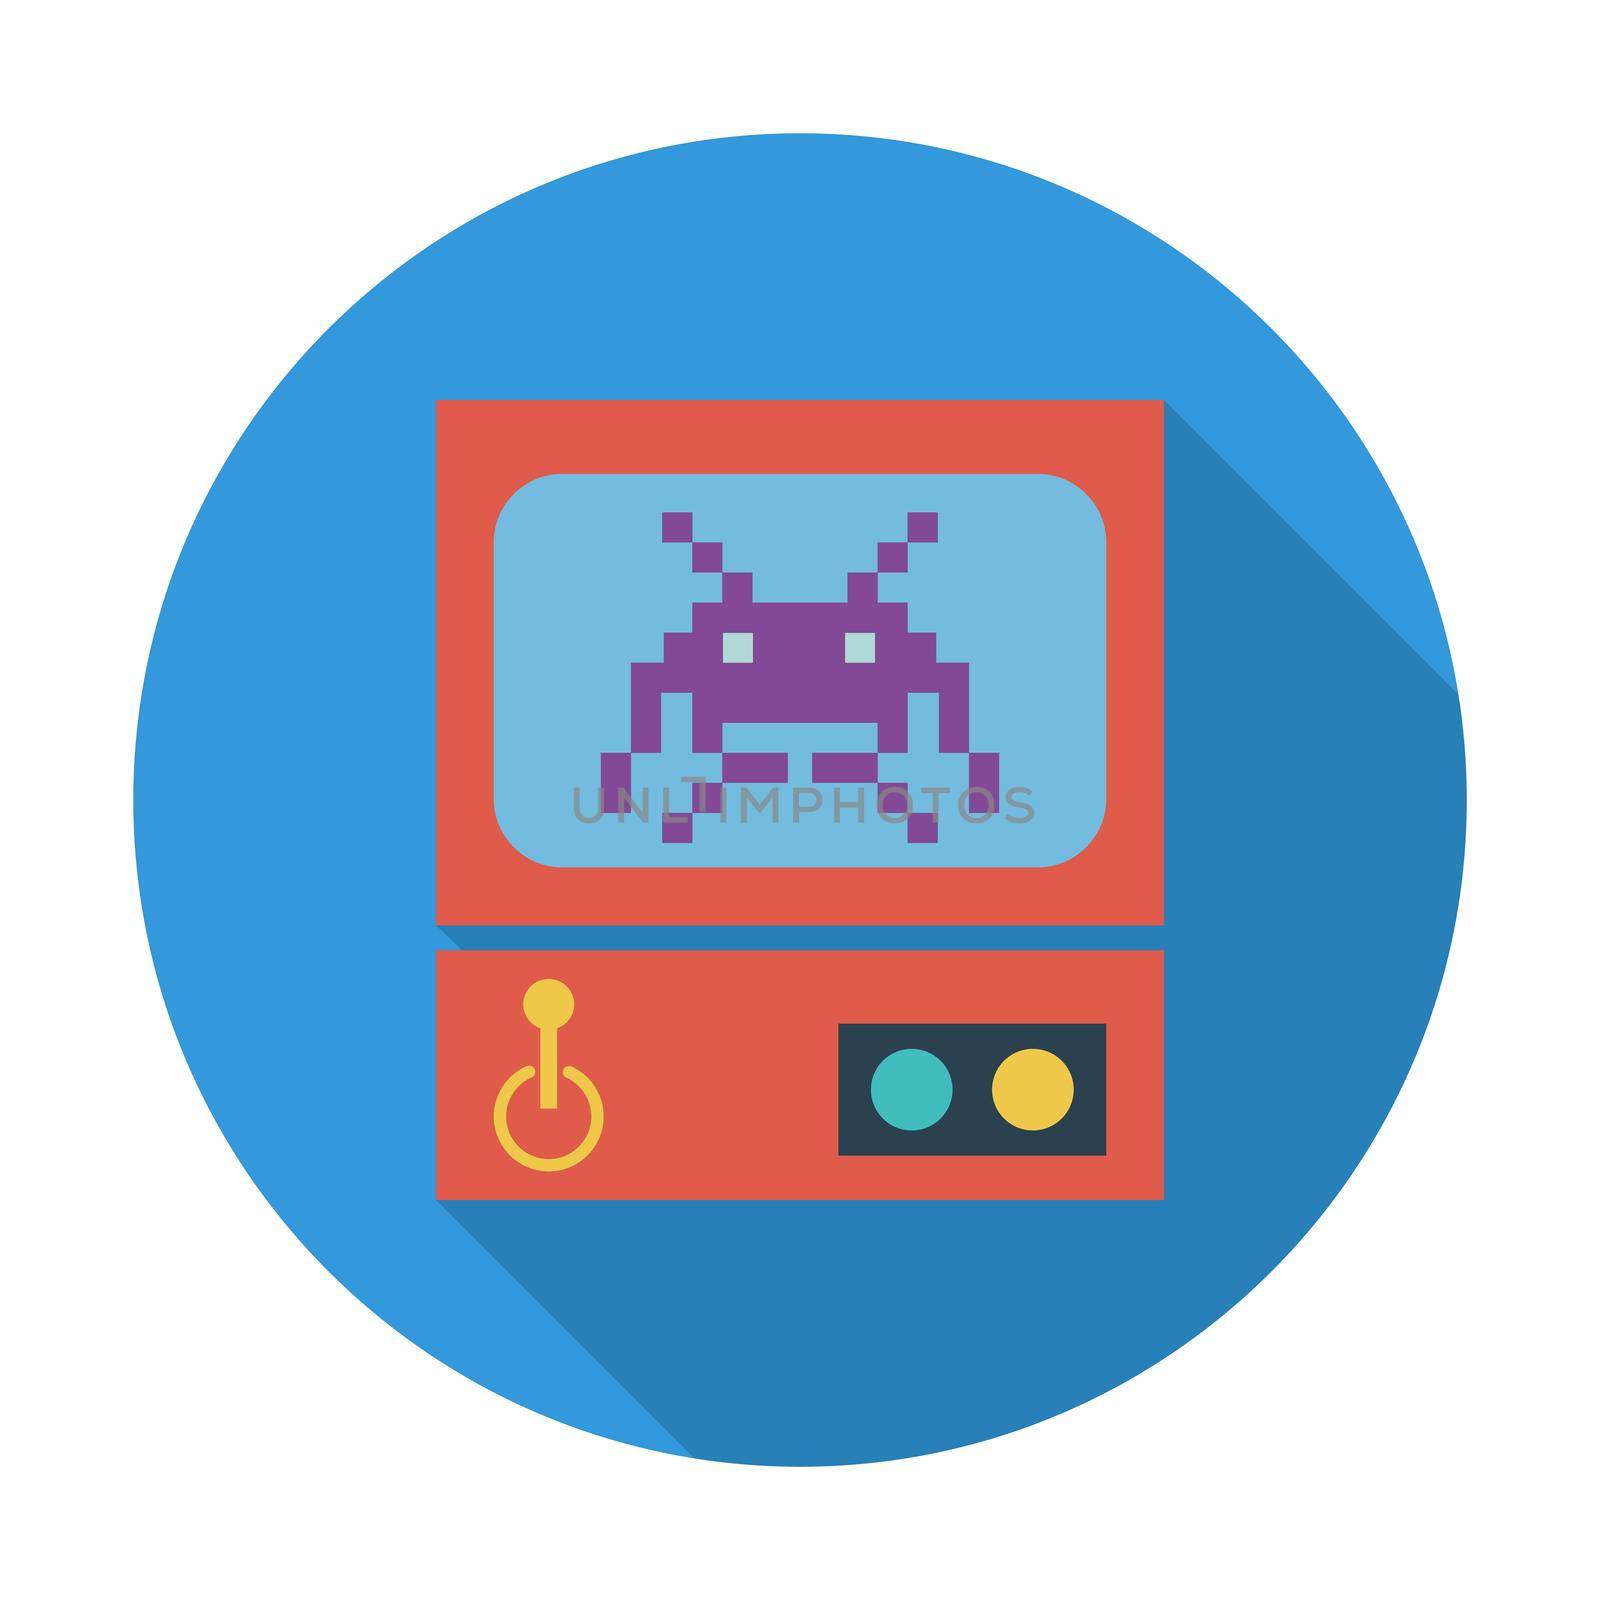 Retro Arcade Machine. Flat icon for mobile and web applications. illustration.